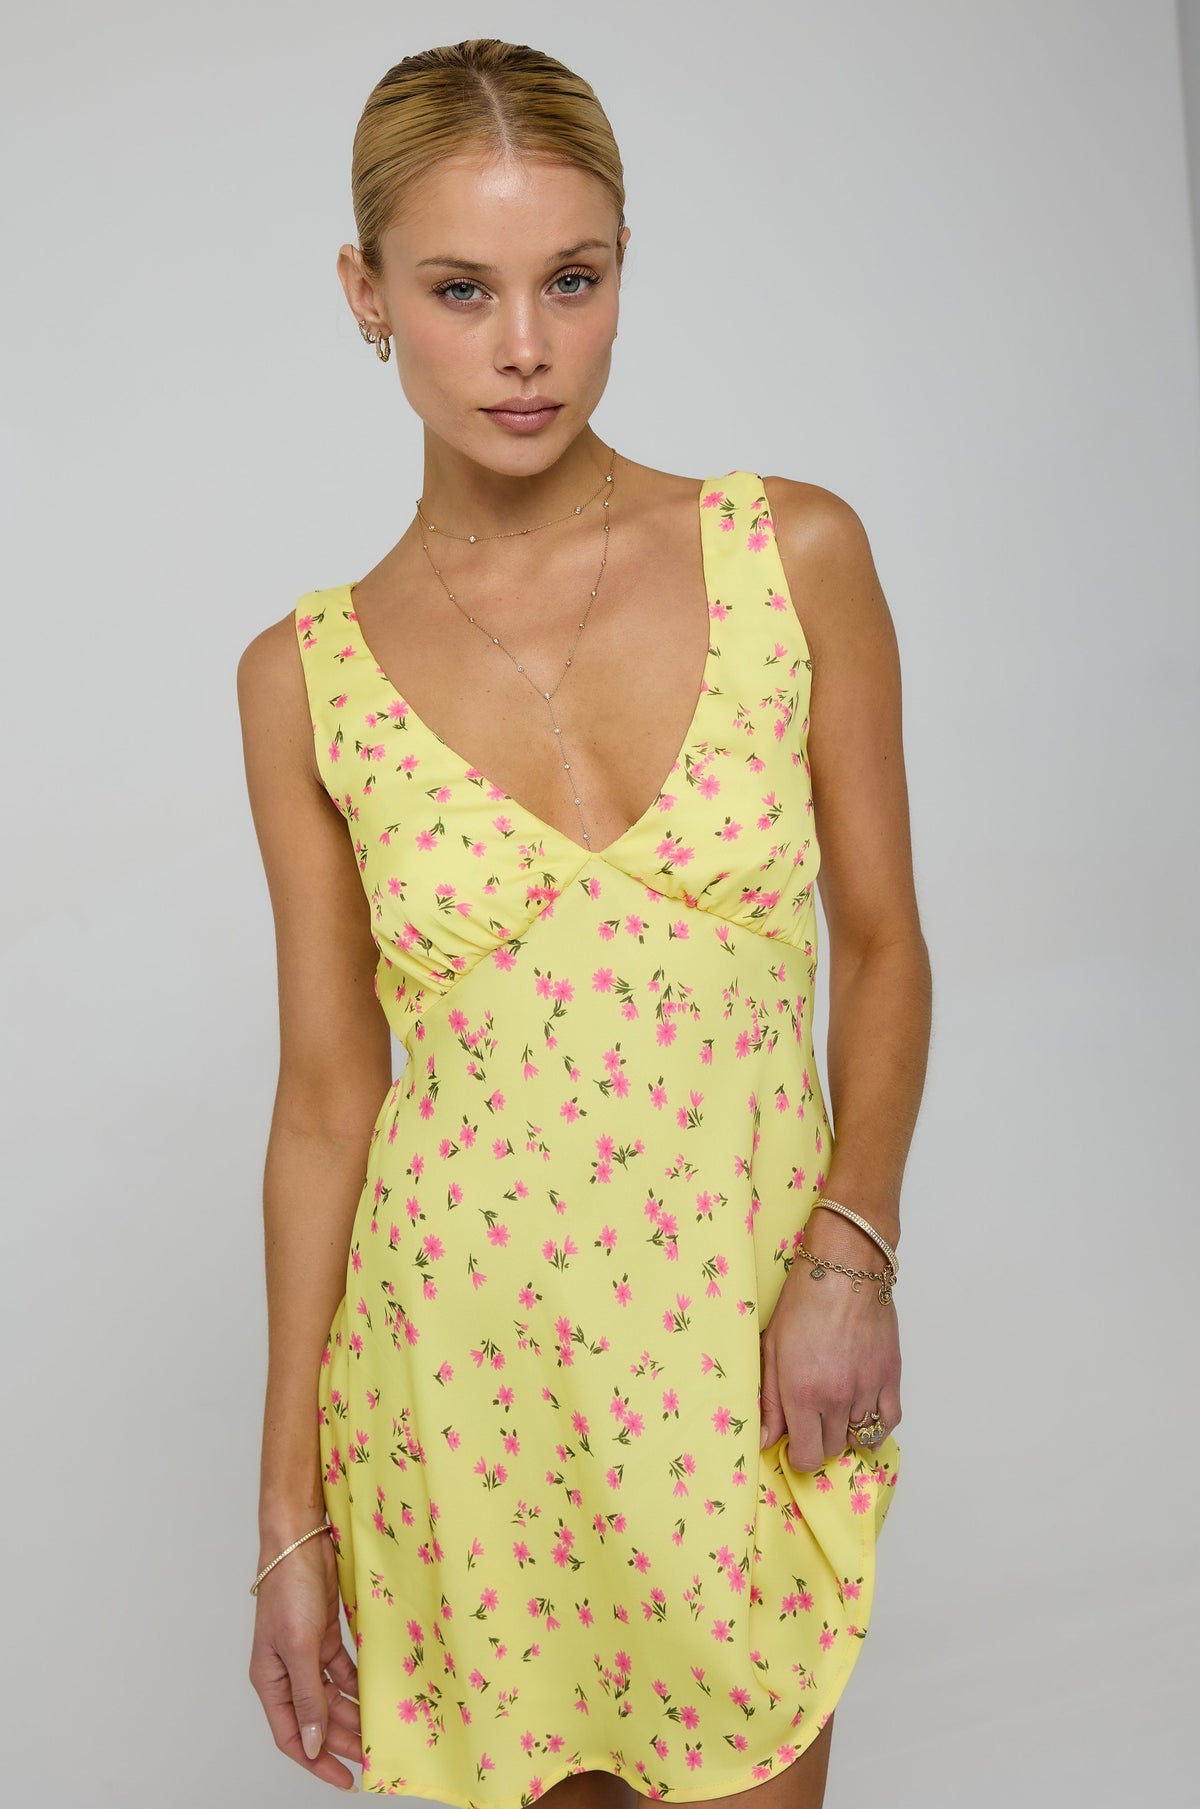 This is an image of Frankie Mini in Honey - RESA featuring a model wearing the dress